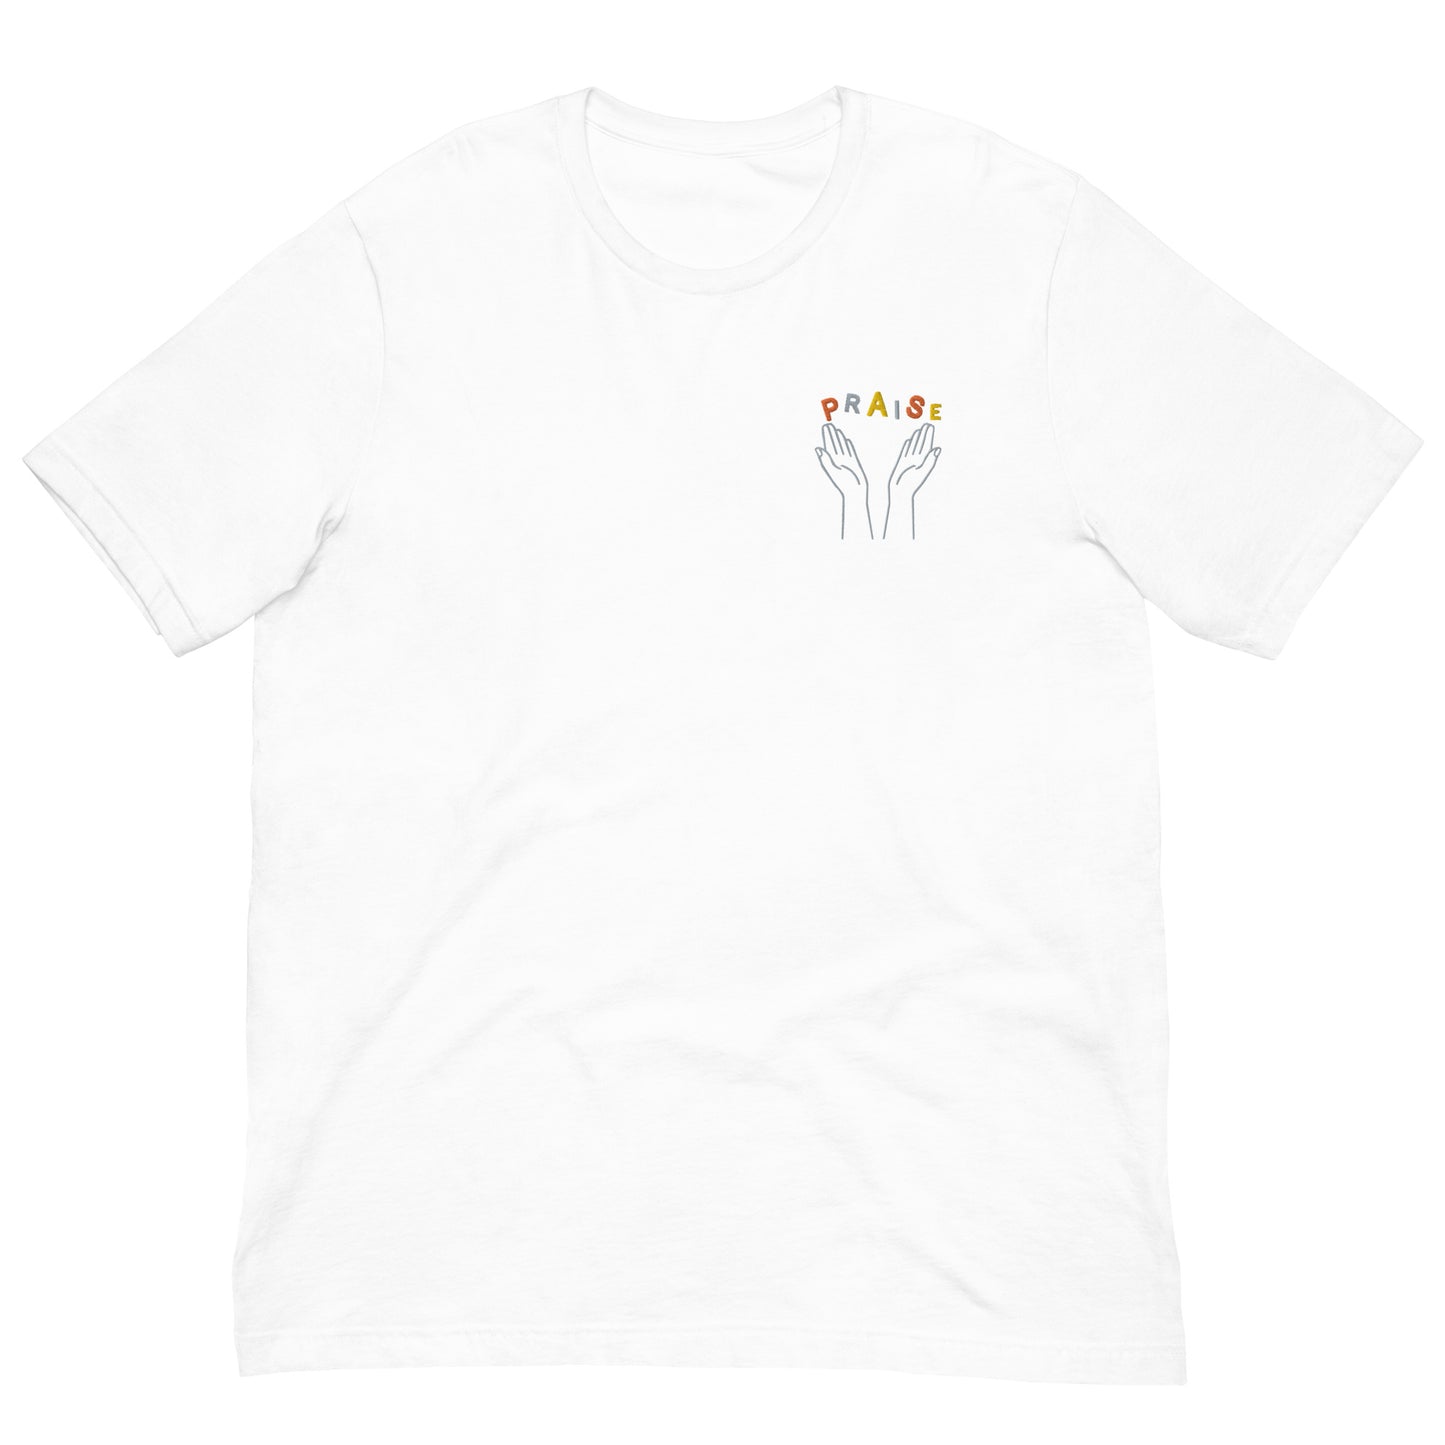 Praise Hands Embroidered T-shirt (left) - S / WHITE - Shirts